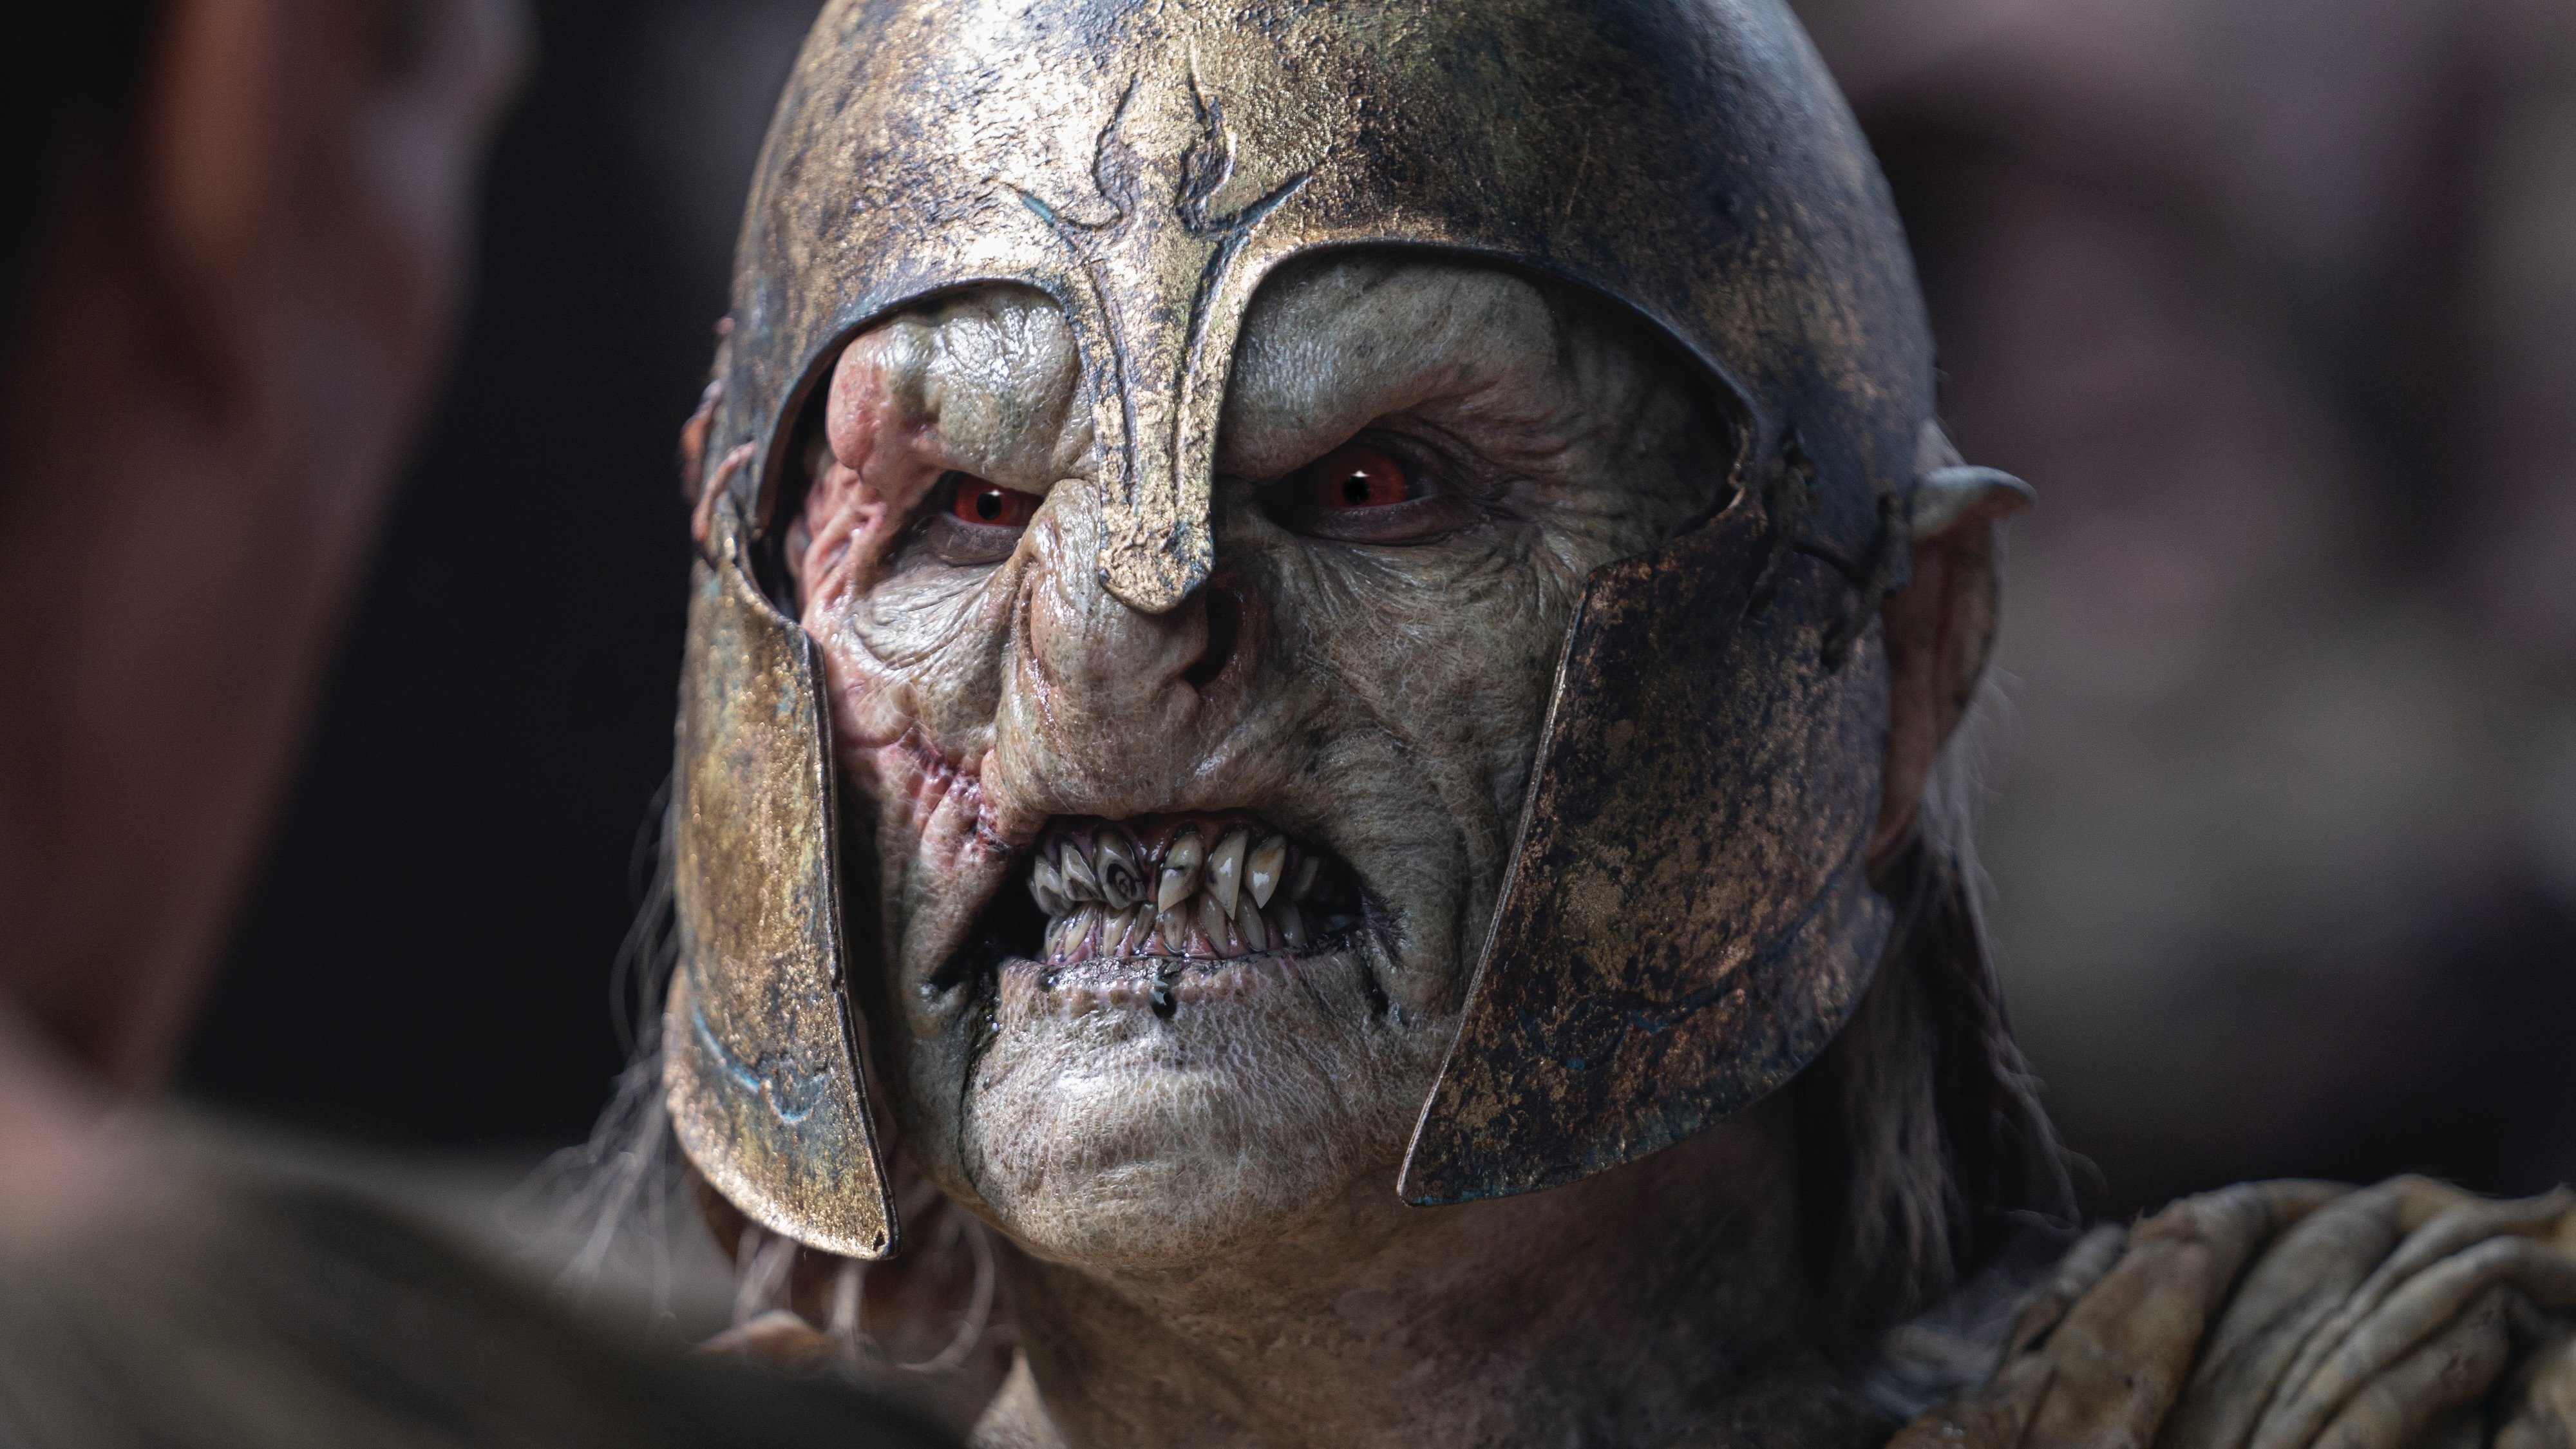 A pale, snarling orc in a helmet.